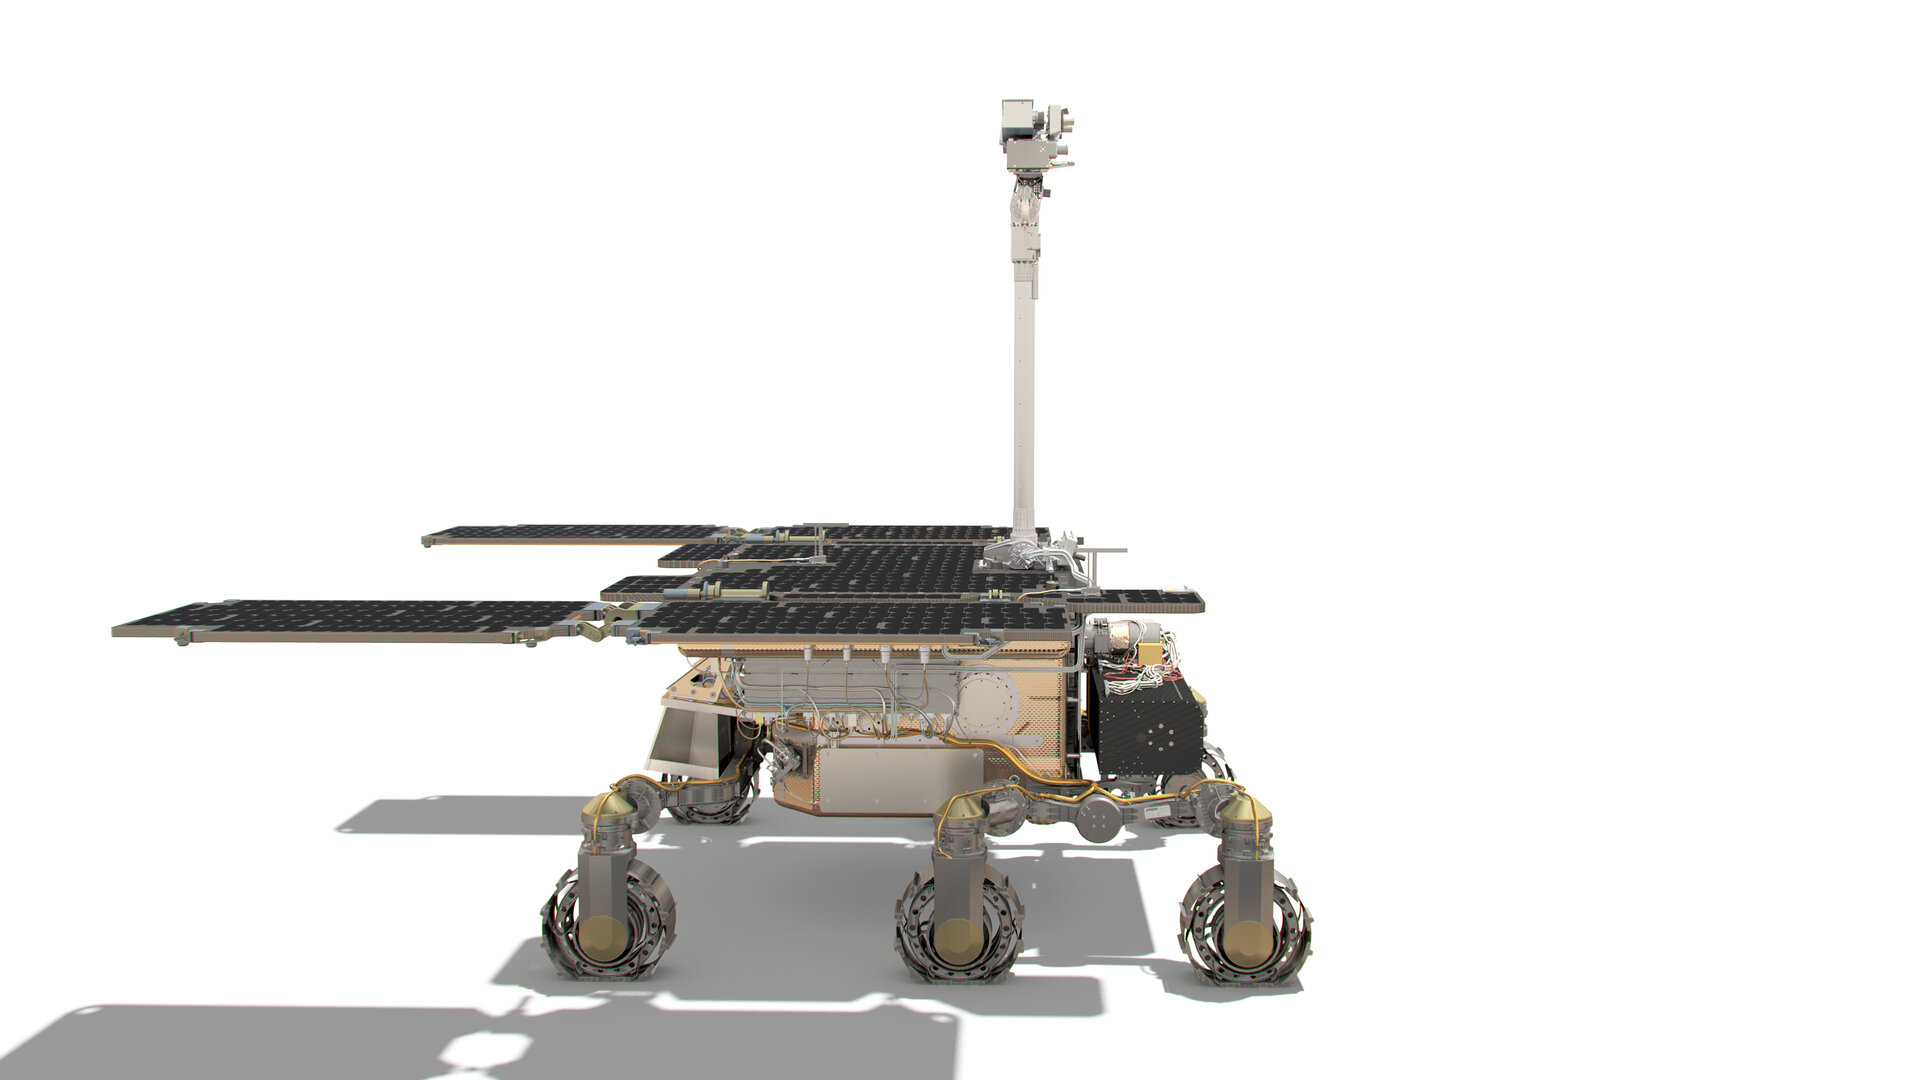 ExoMars rover: side view